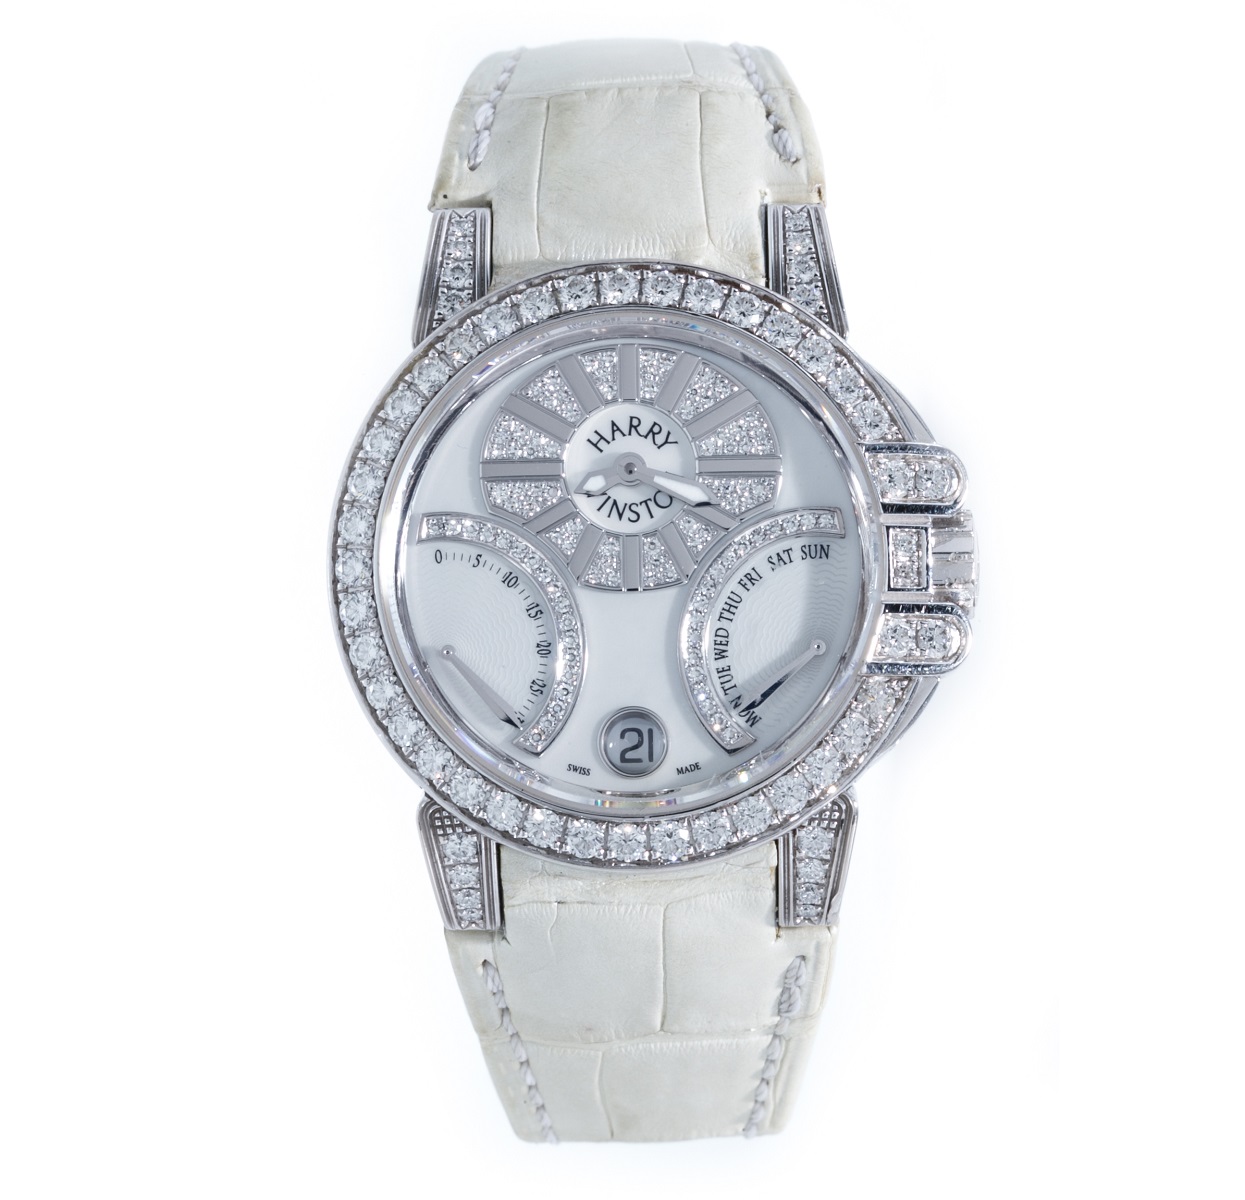 Harry Winston Ocean Collection Chronograph 36mm Automatic in White Gold with Diamonds Bezel